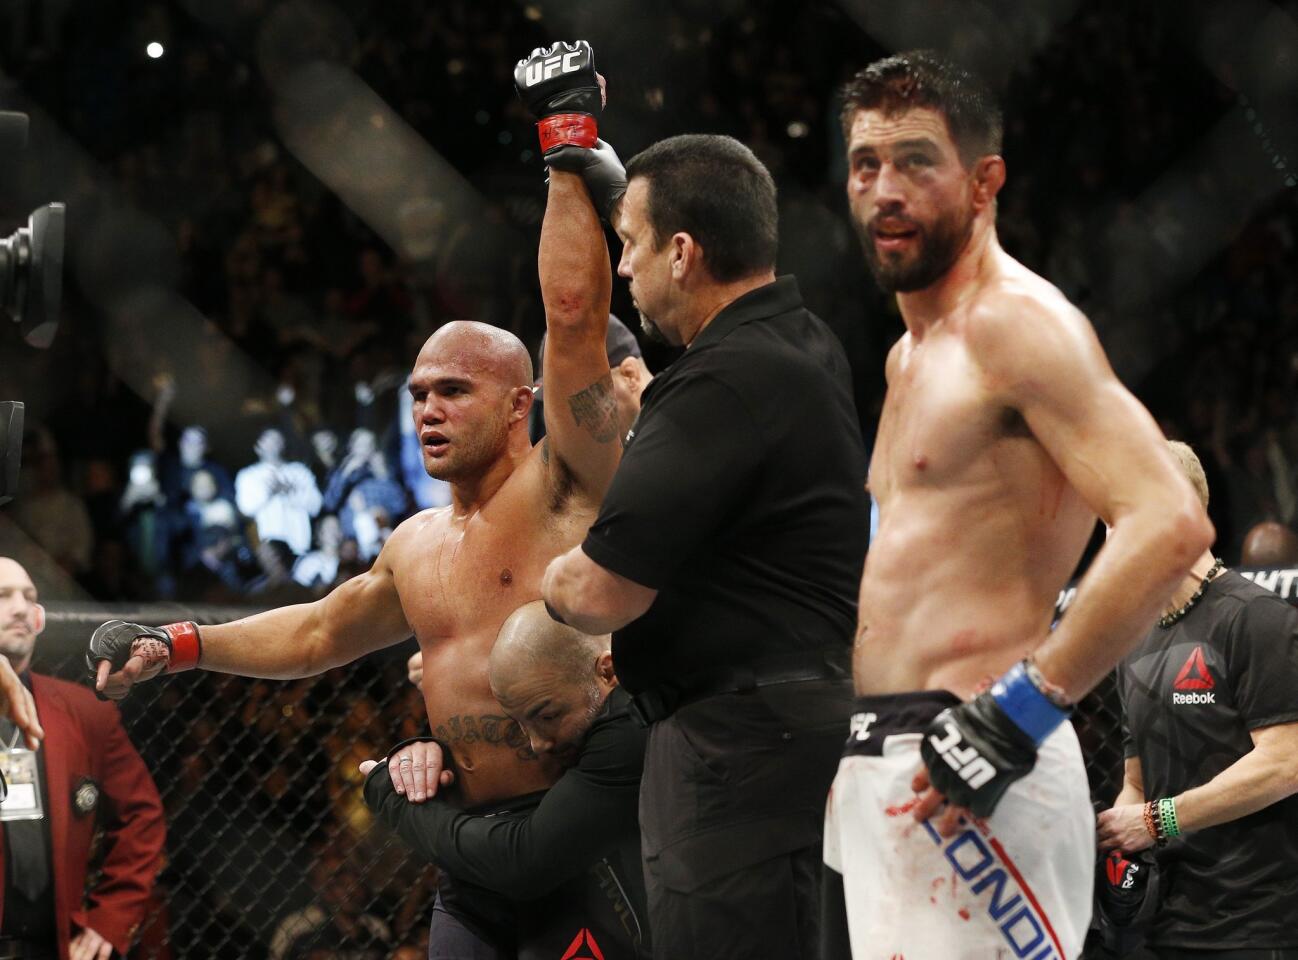 Robbie Lawler, left, celebrates after defeating Carlos Condit during a welterweight championship mixed martial arts bout at UFC 195, Saturday, Jan. 2, 2016, in Las Vegas.